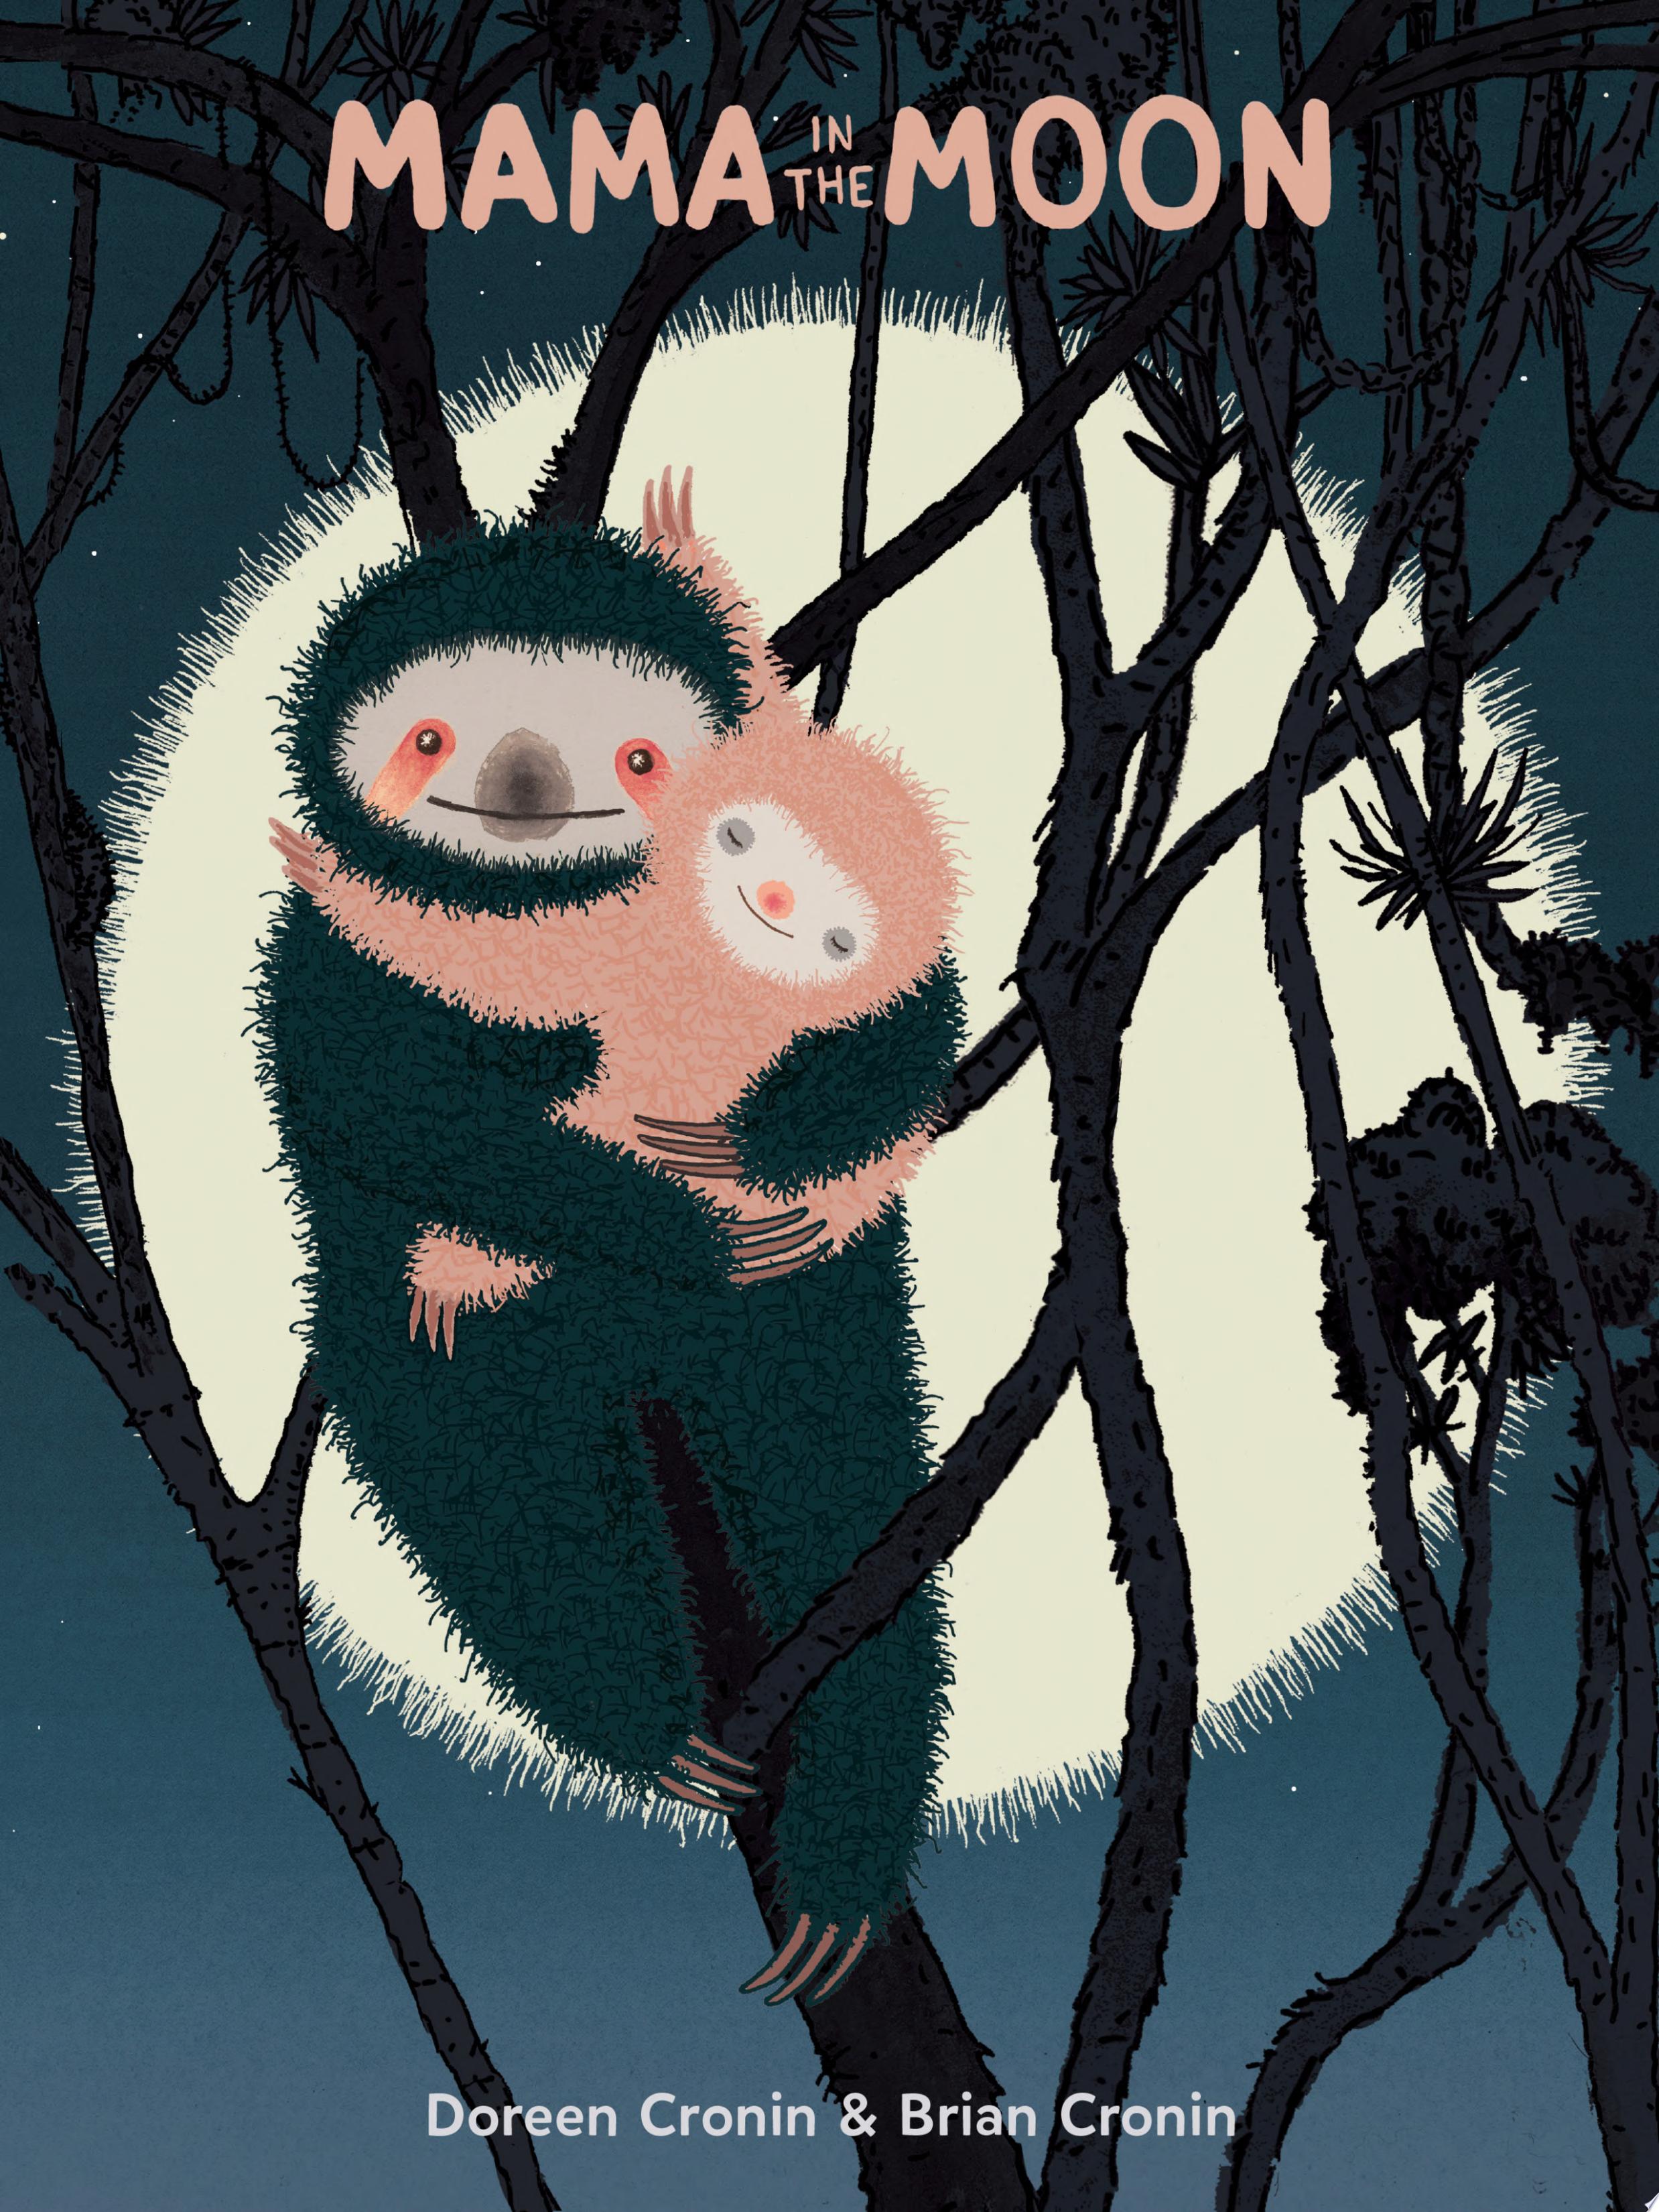 Image for "Mama in the Moon"